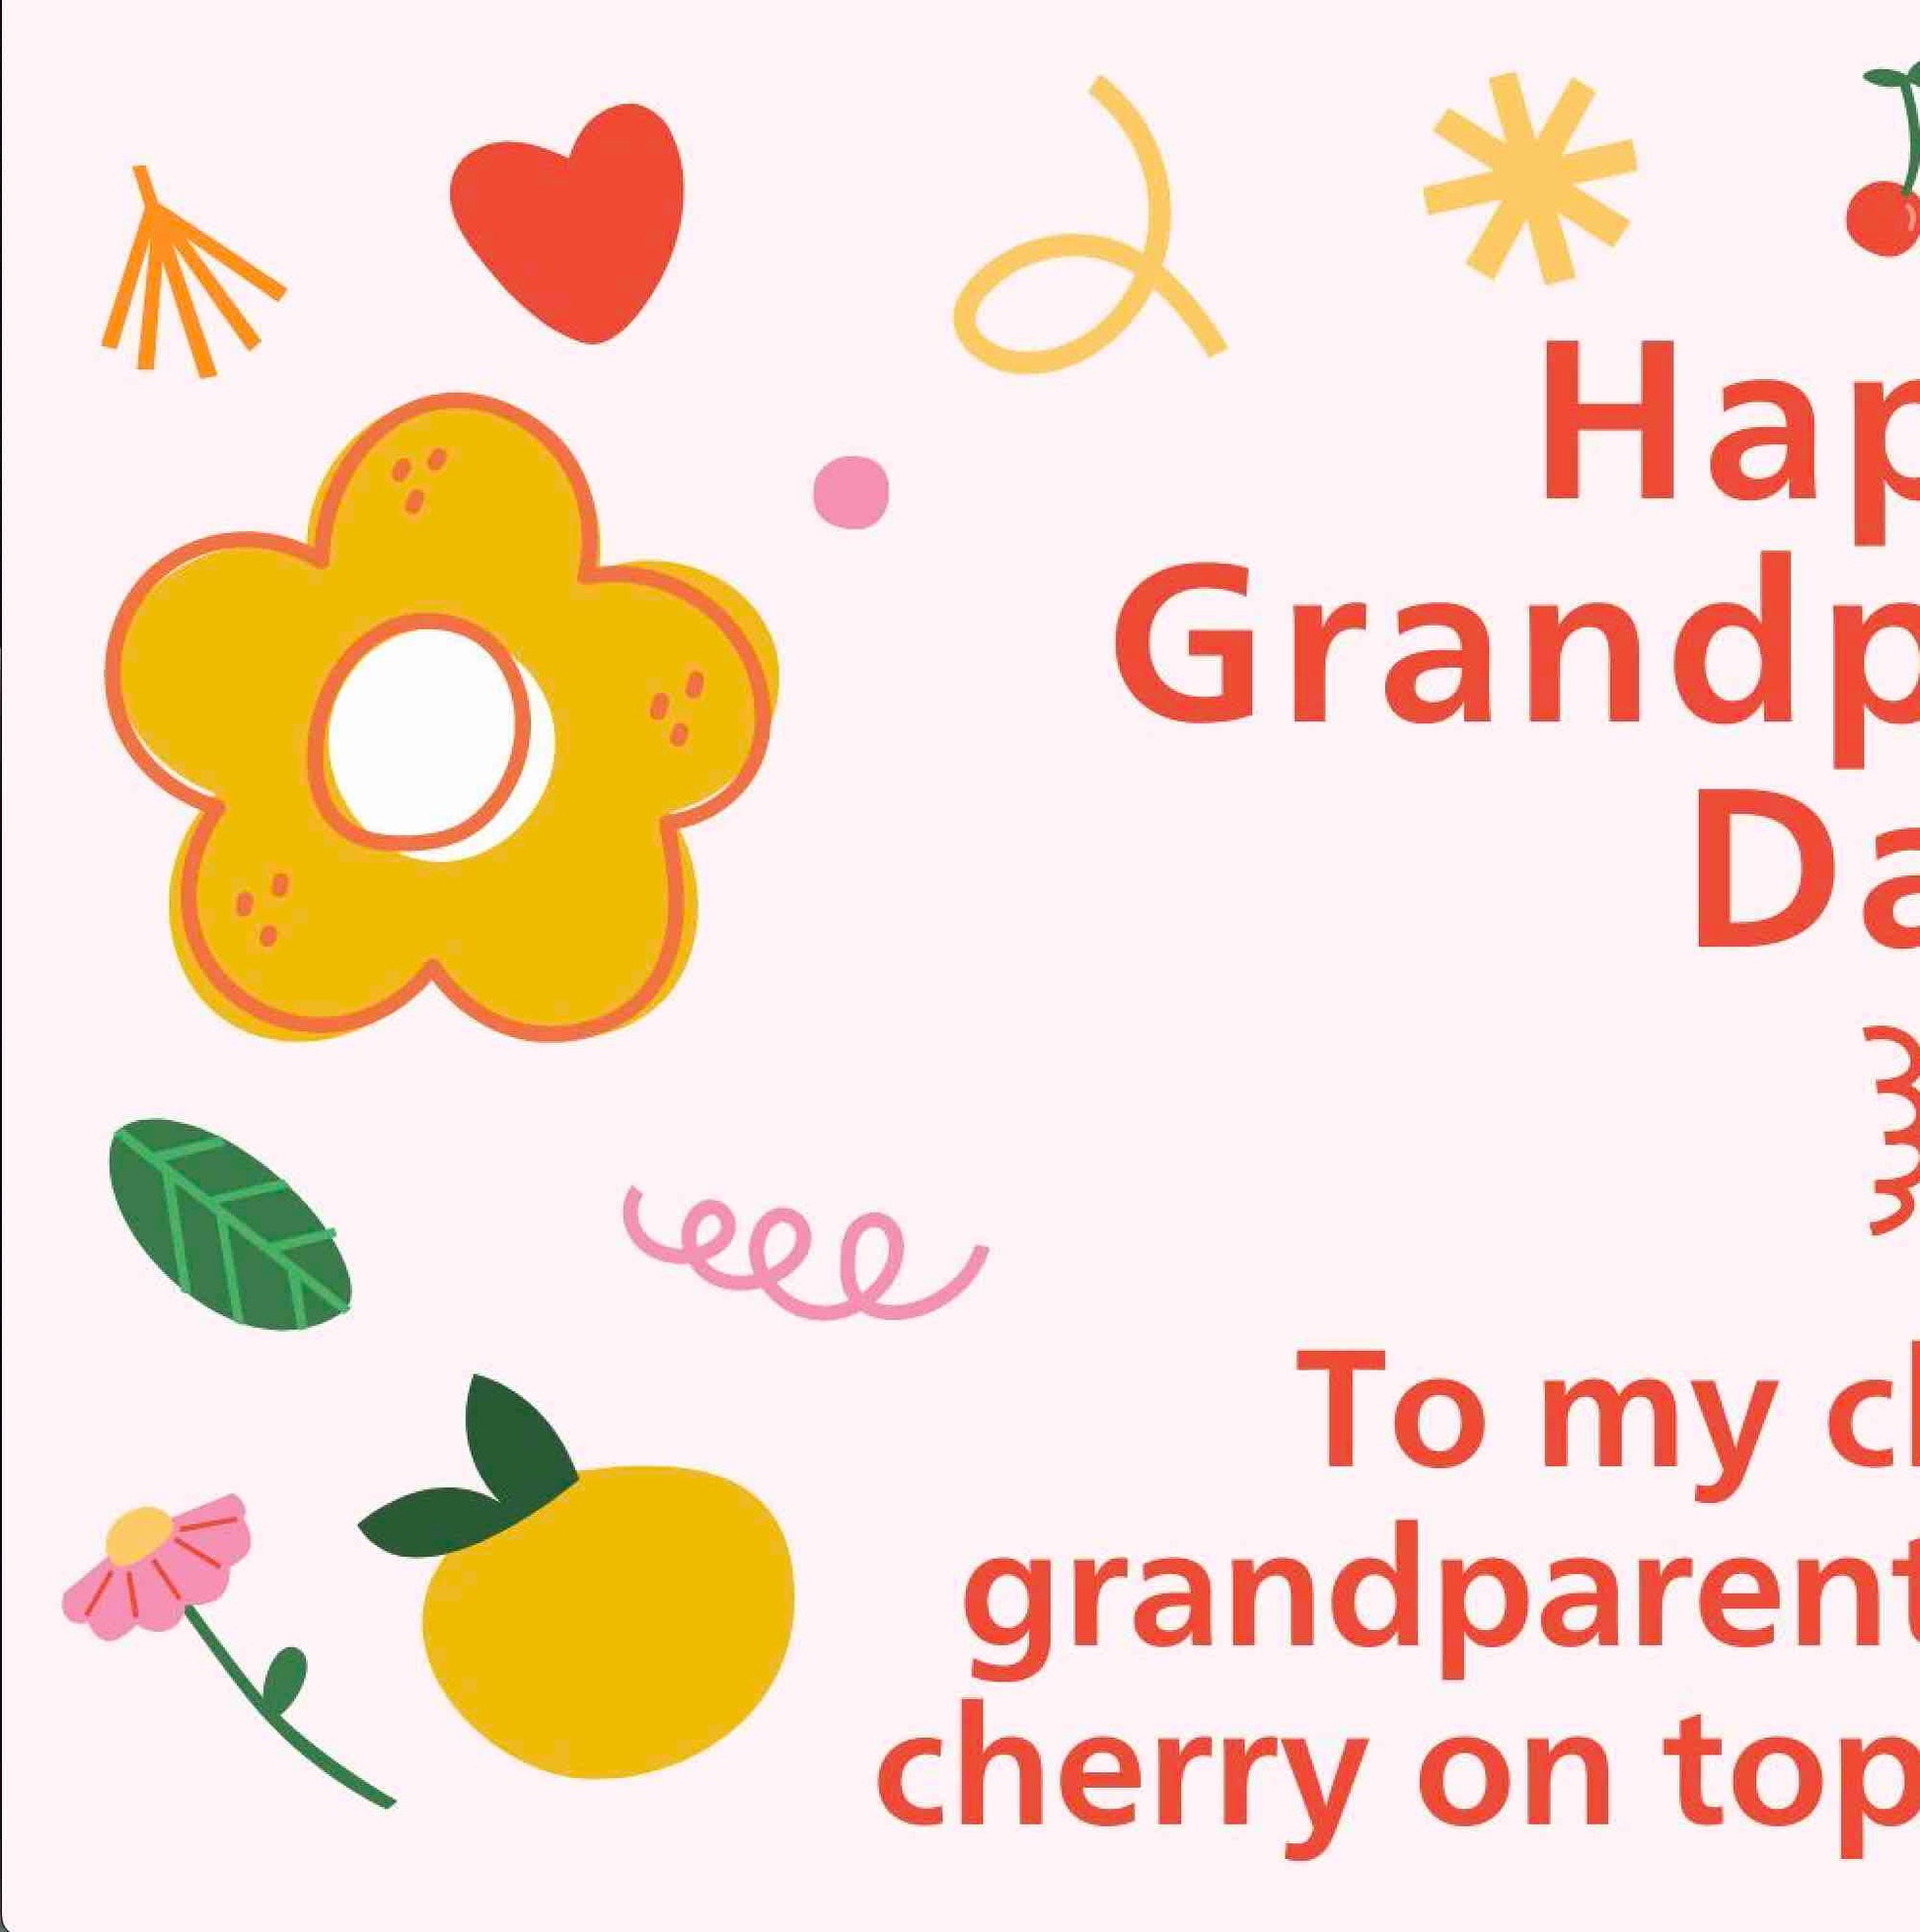 Cherry on Top (Grandparents Day E-card) - Make Momentos